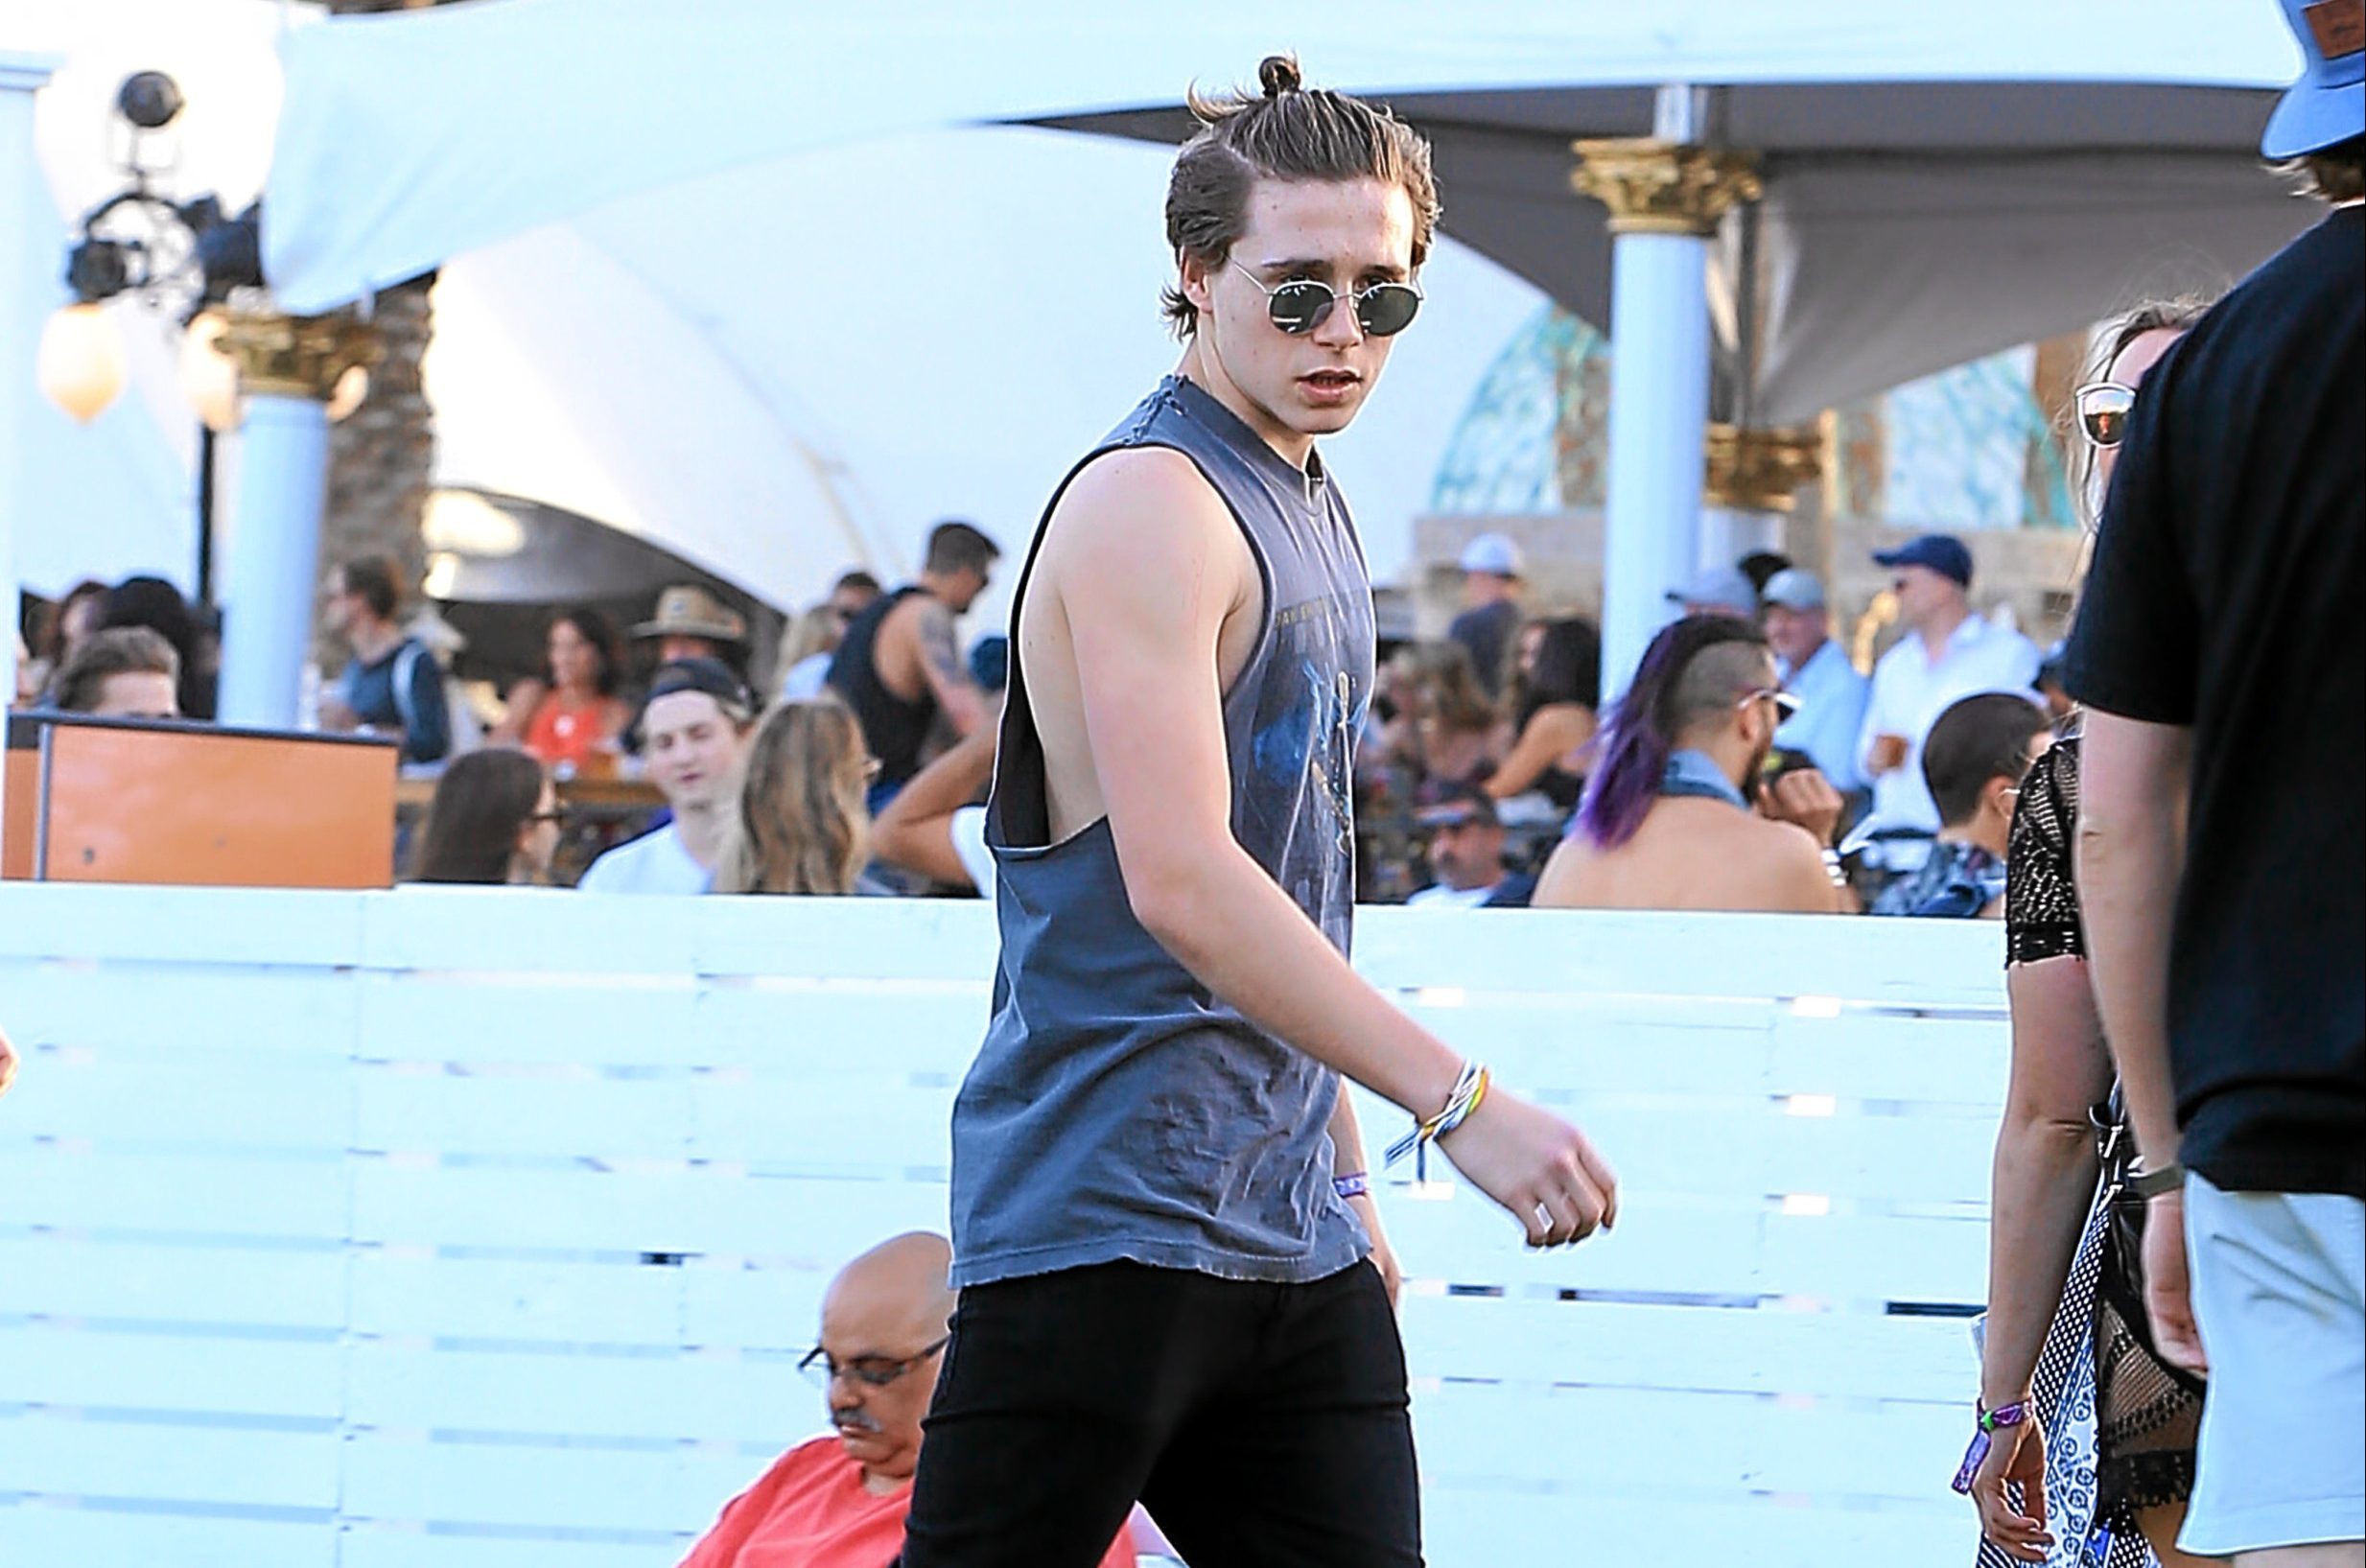 Brooklyn Beckham getting a girlfriend has caused ructions in the Penman home.